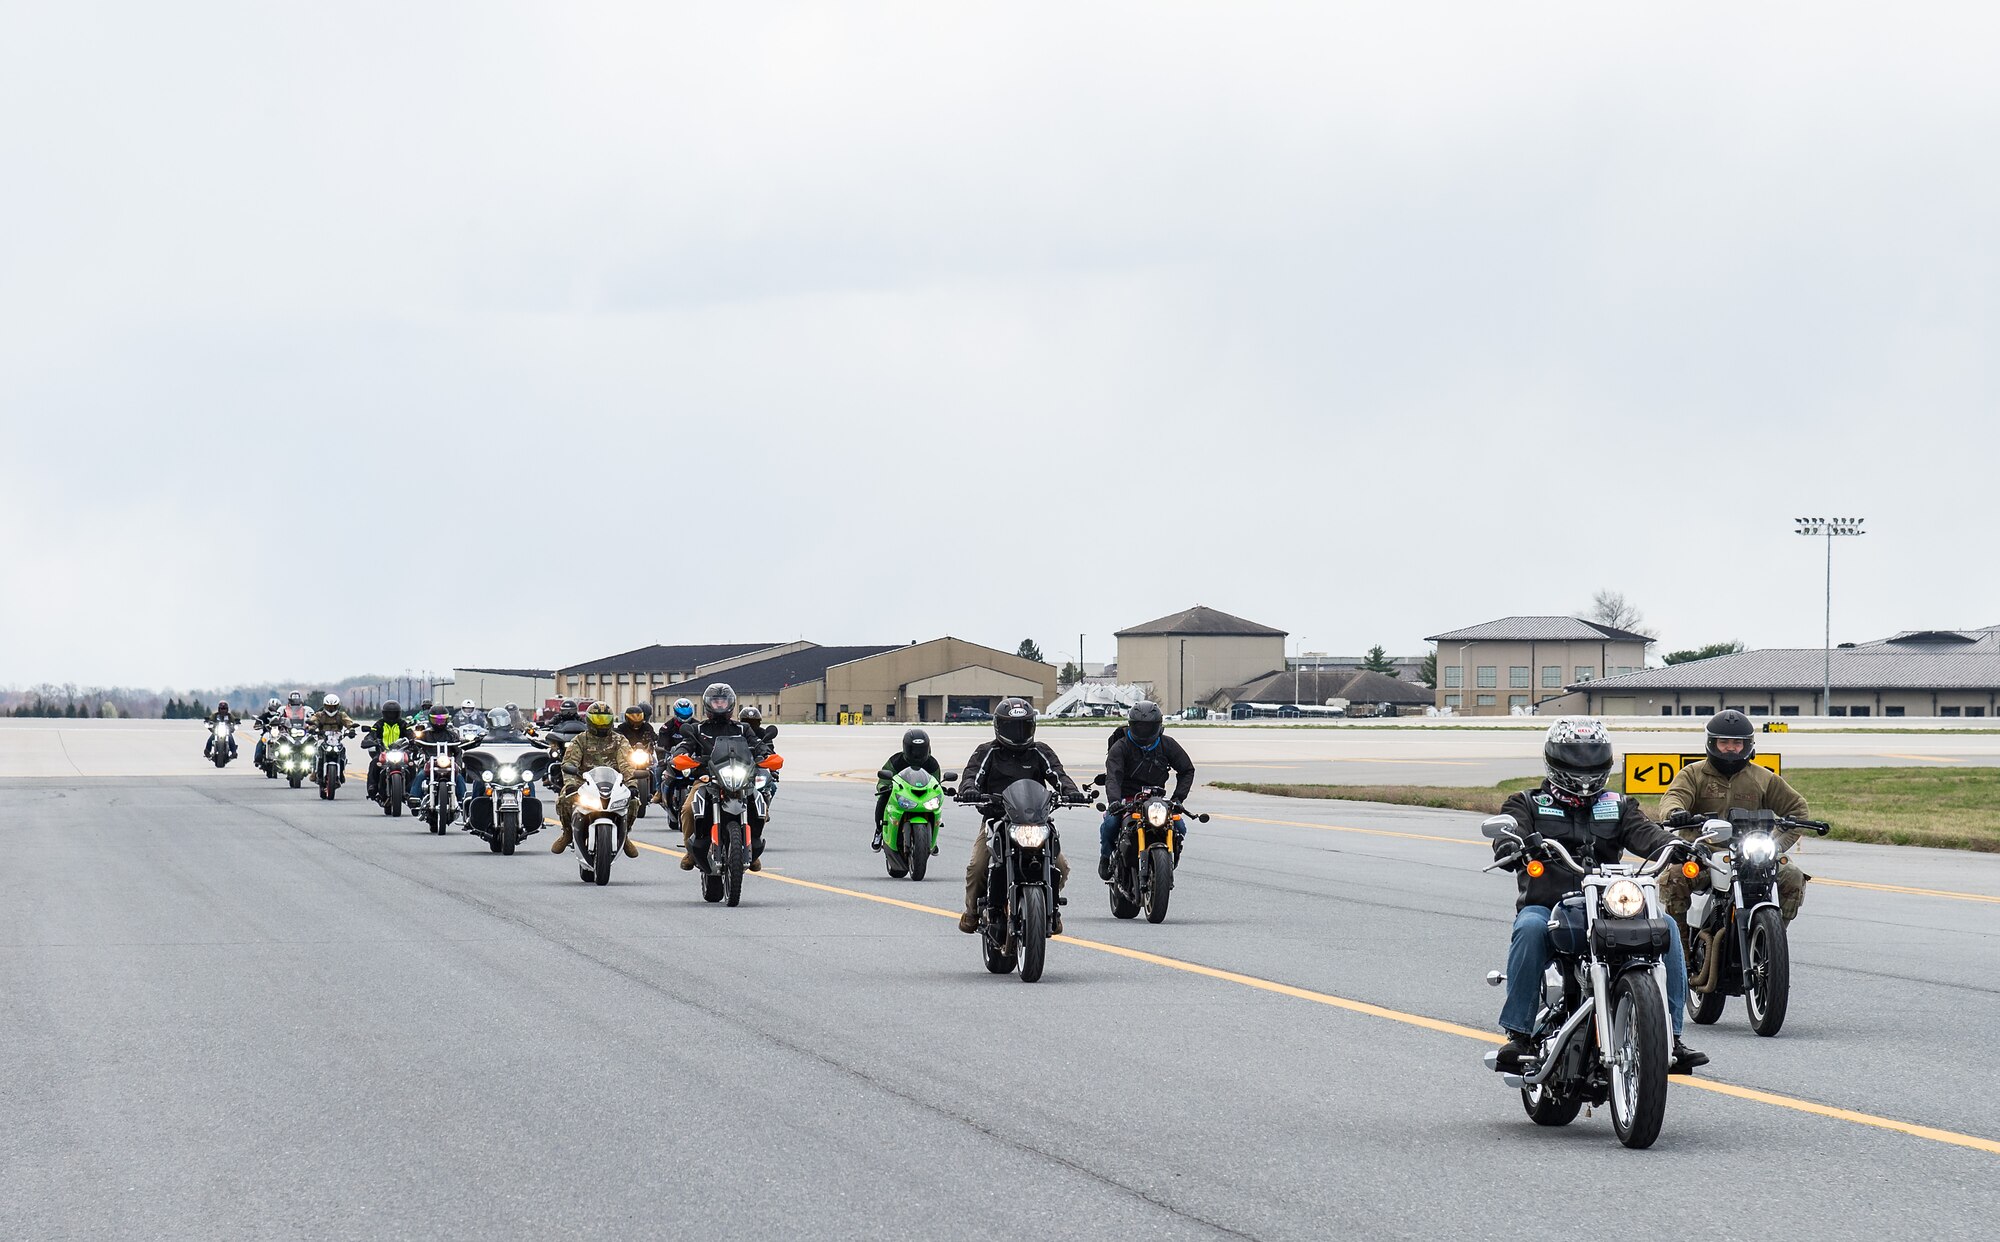 More than 20 motorcyclists ride down the taxiway on Dover Air Force Base, Delaware, April 2, 2021. The 436th Operations Support Squadron airfield manager led riders as part of Dover AFB’s motorcycle safety day. (U.S. Air Force photo by Roland Balik)